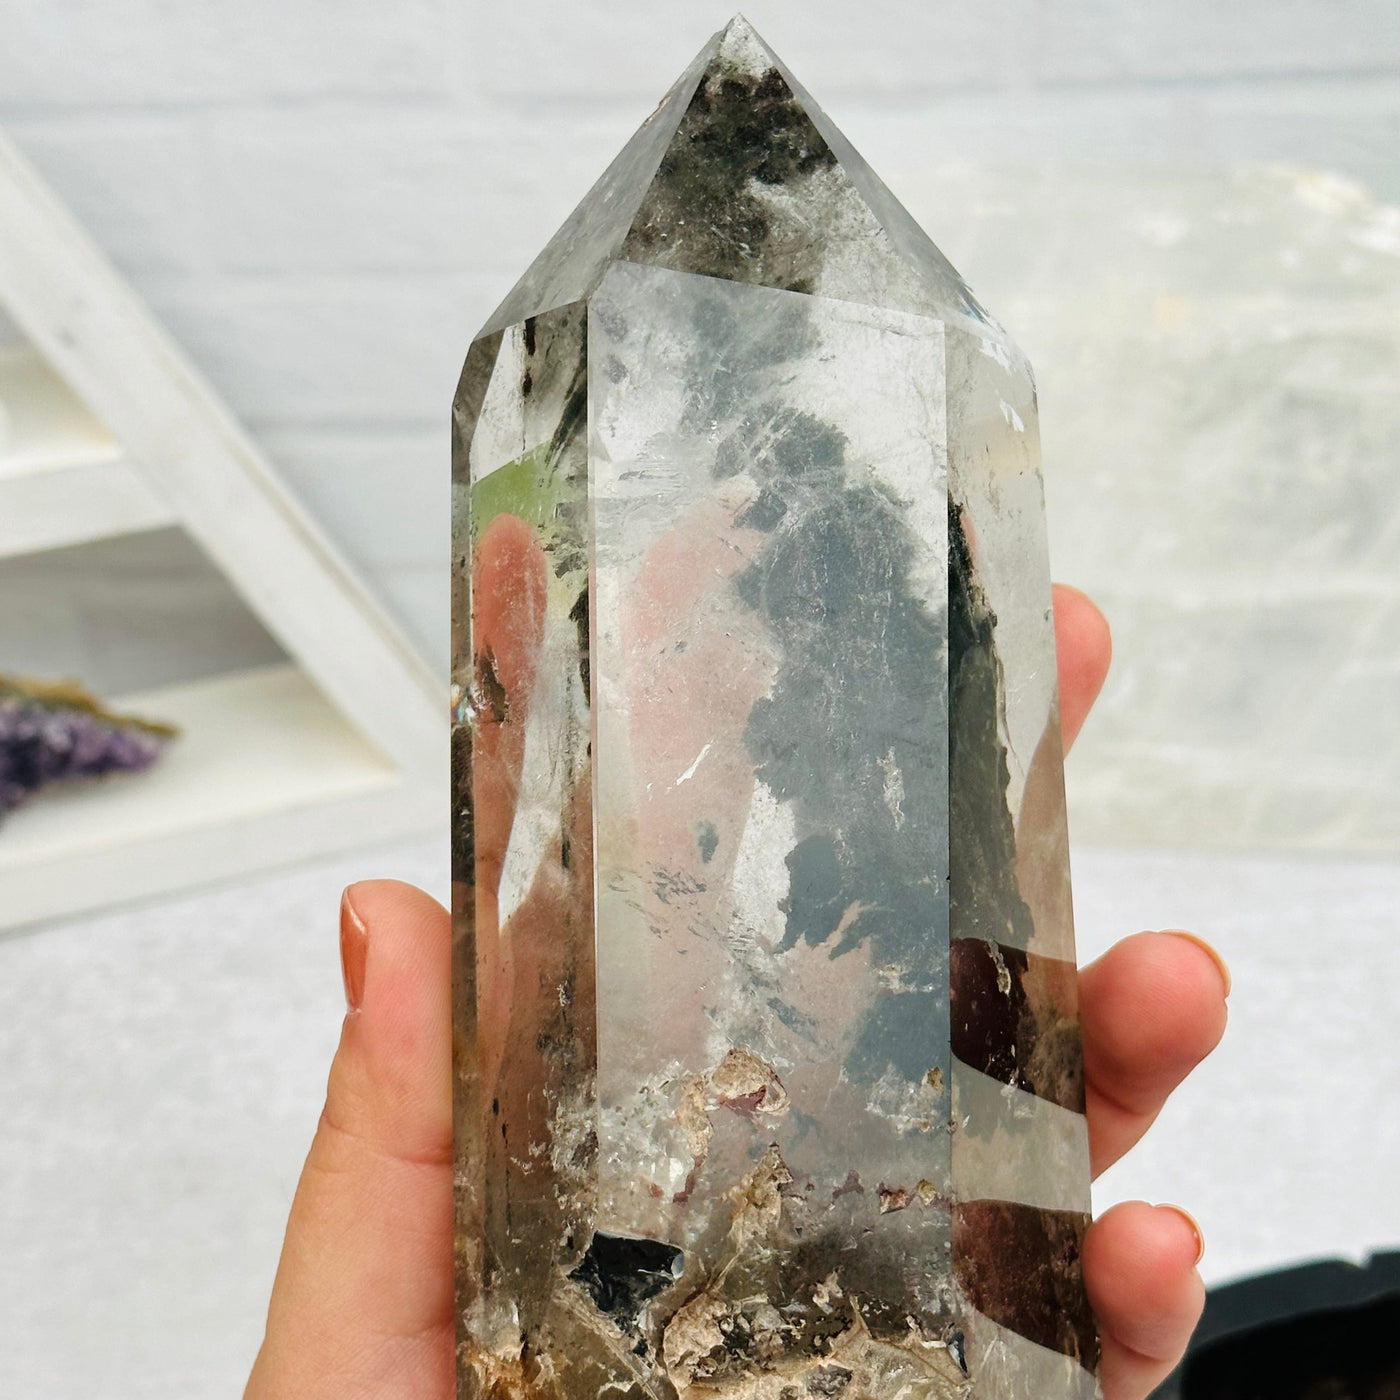 quartz in hand for size reference 